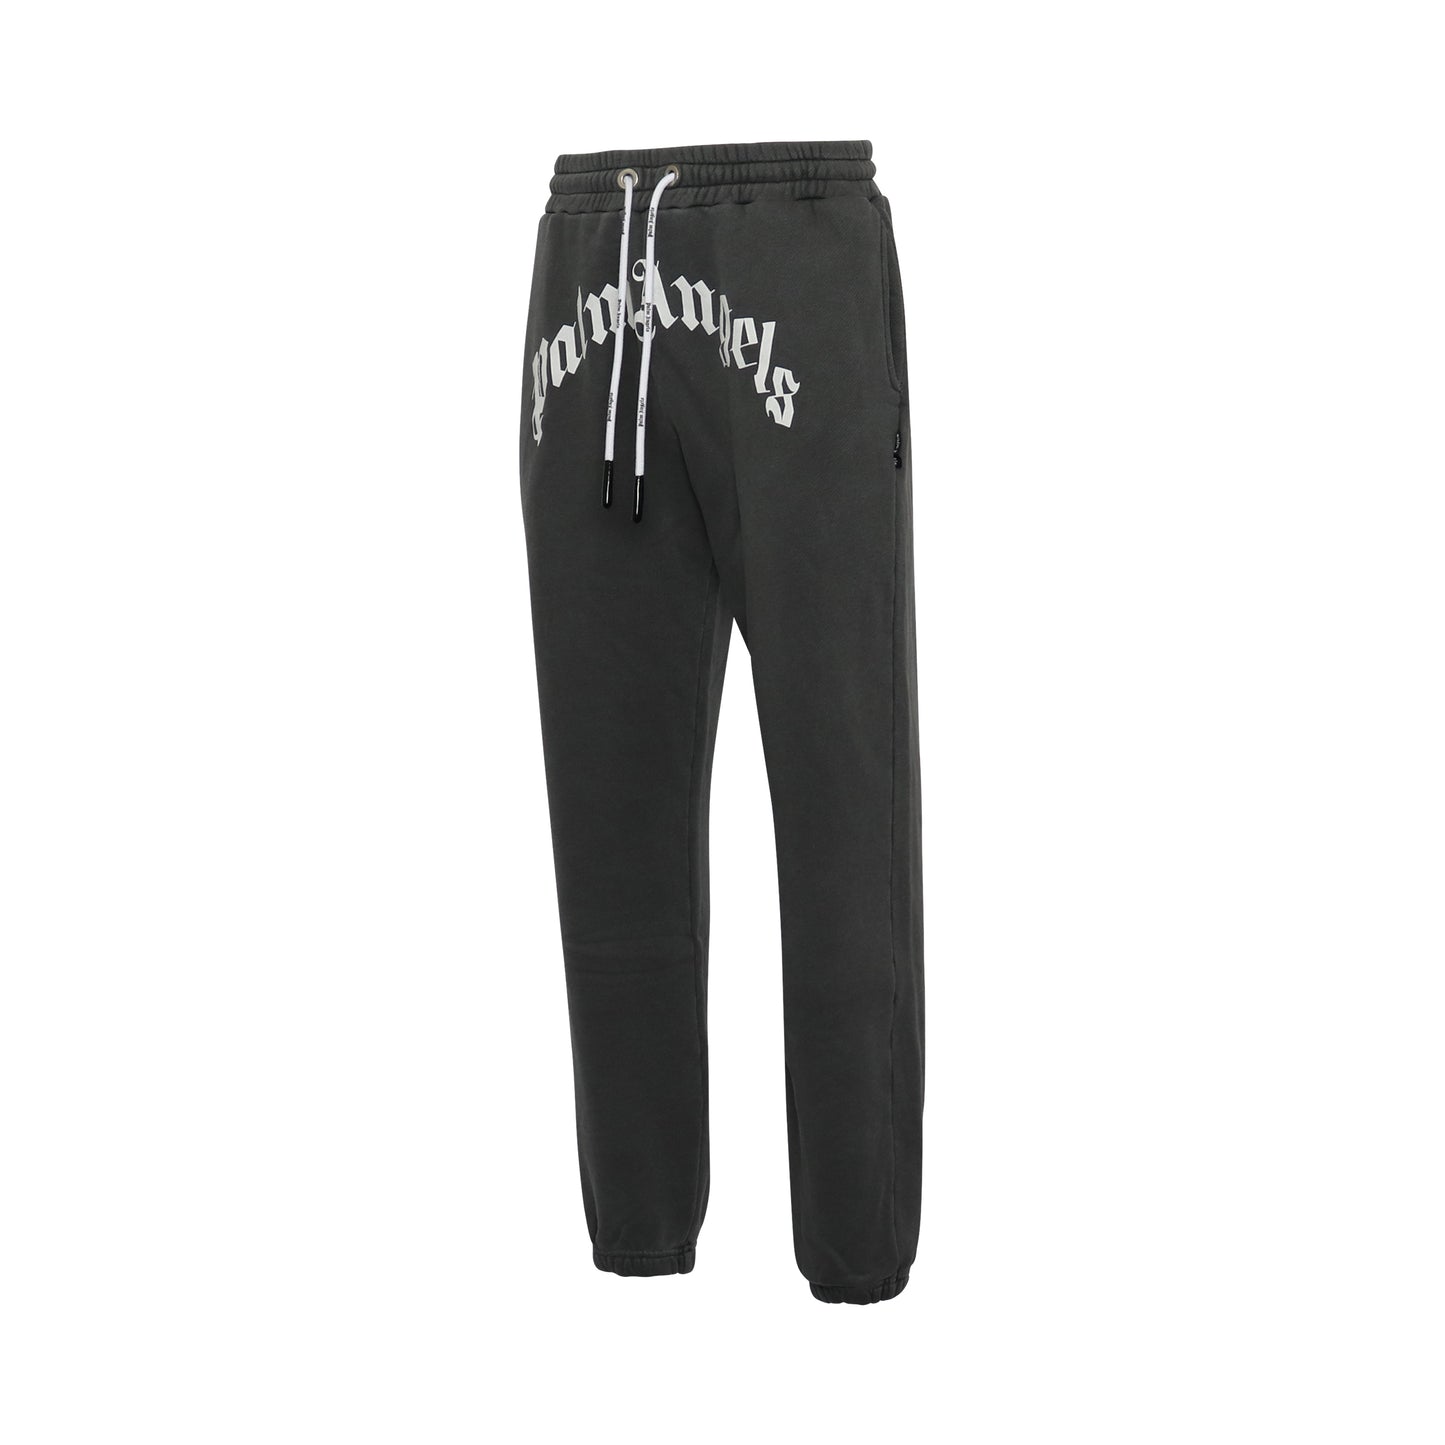 Gd Curved Logo Sweatpants in Black